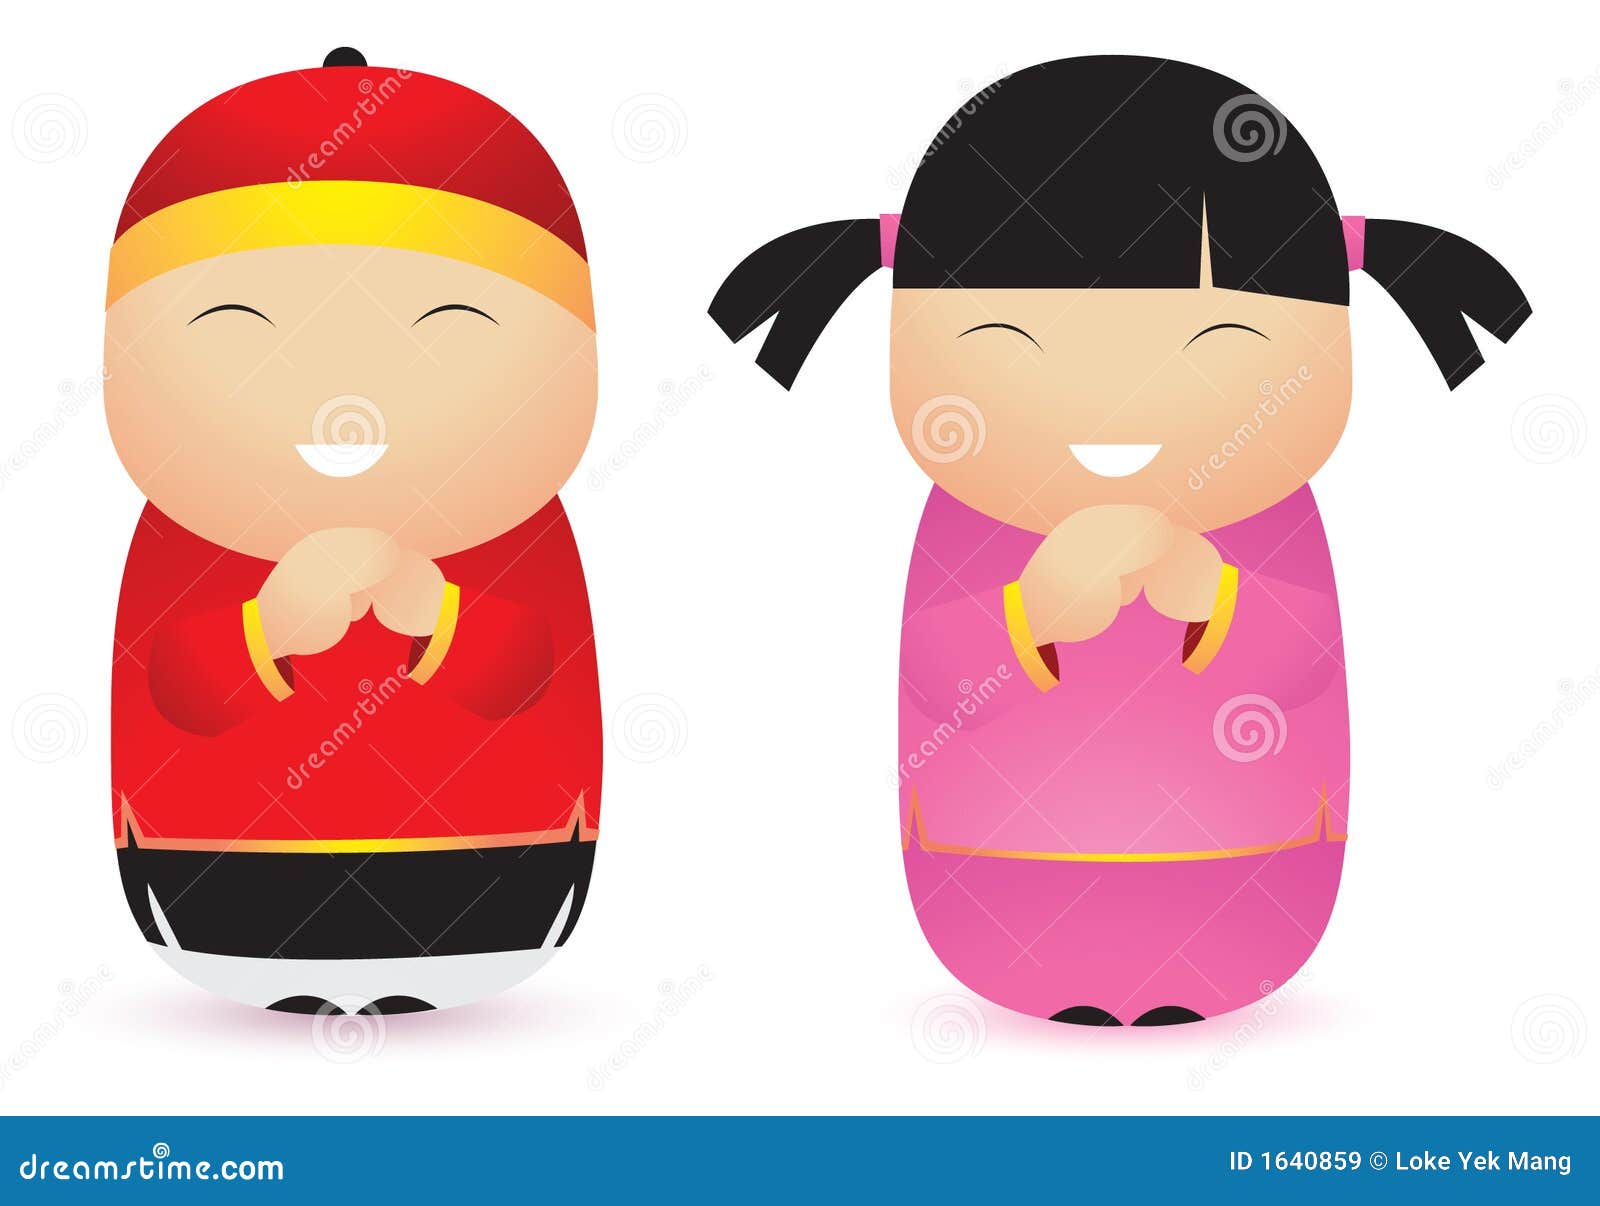 clipart chinese girl - photo #42